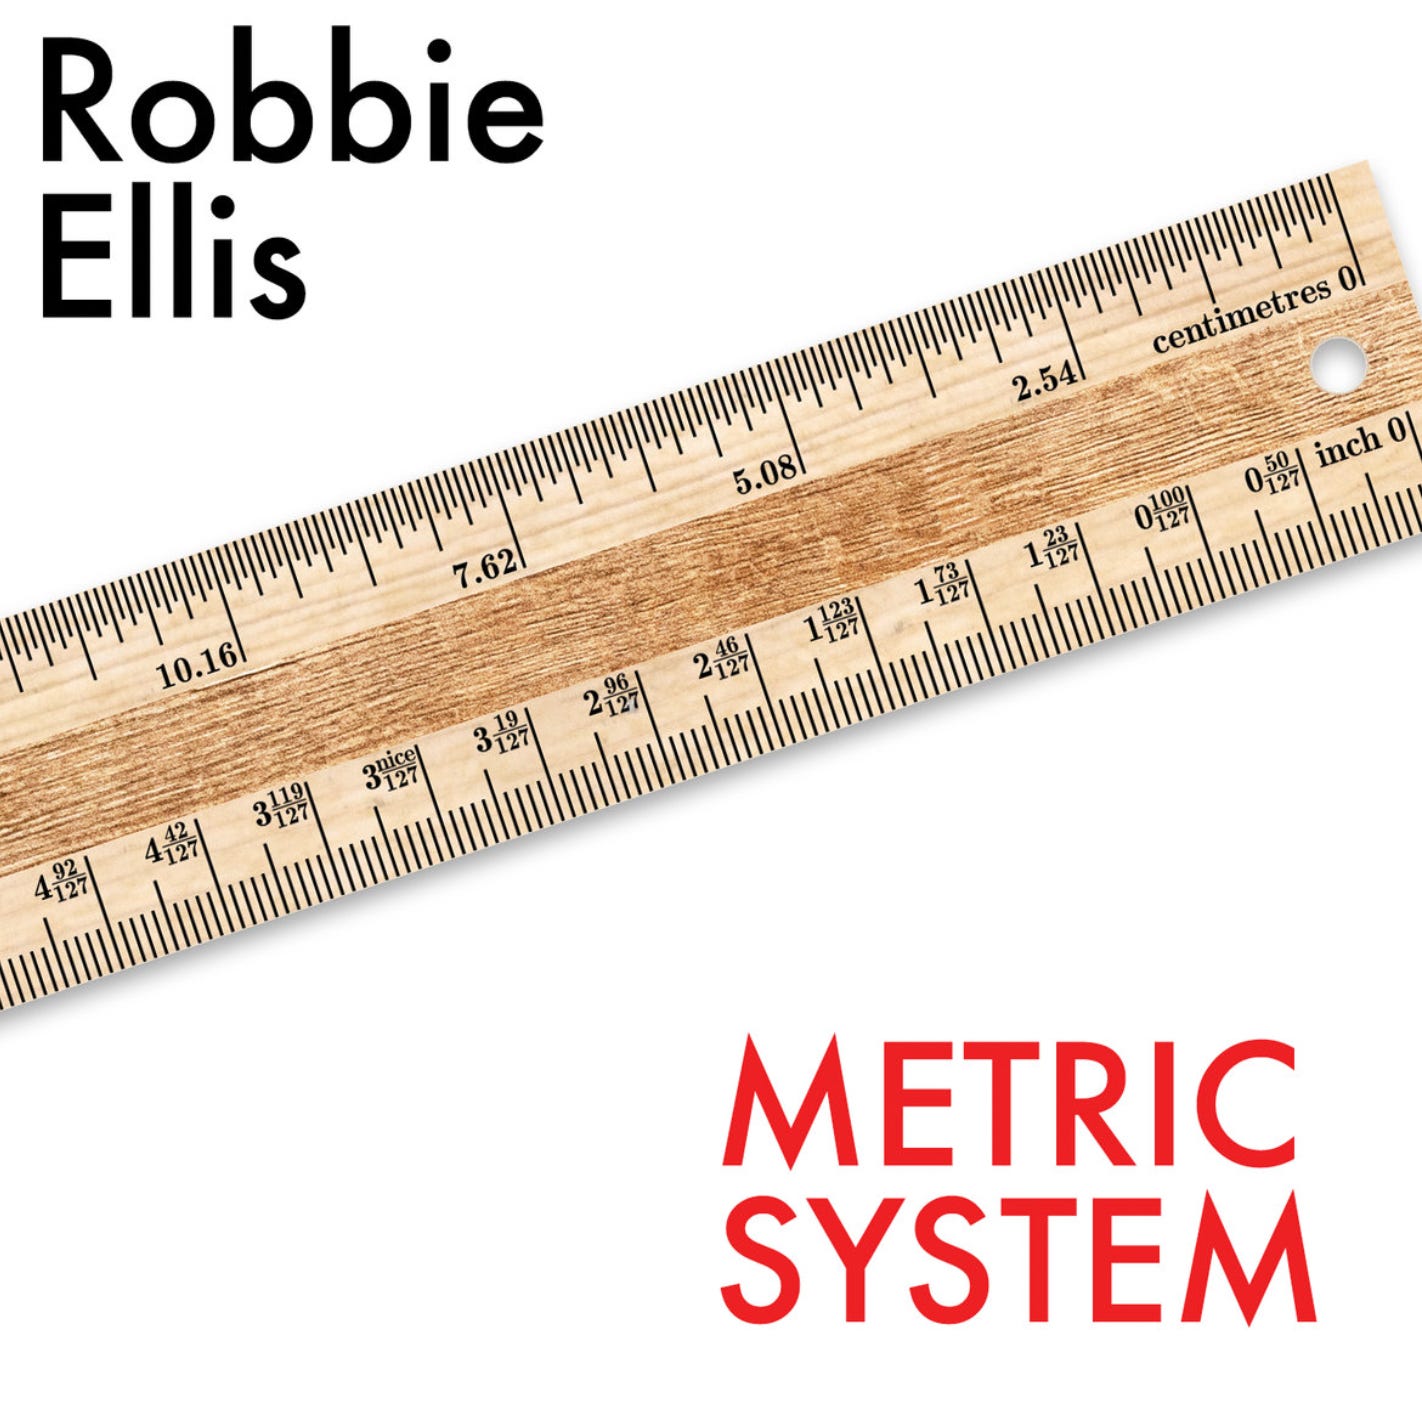 Text: Robbie Ellis, Metric System. Includes an image of a rule where the inches markings are labelled with centimetres and vice versa. Very confusing.